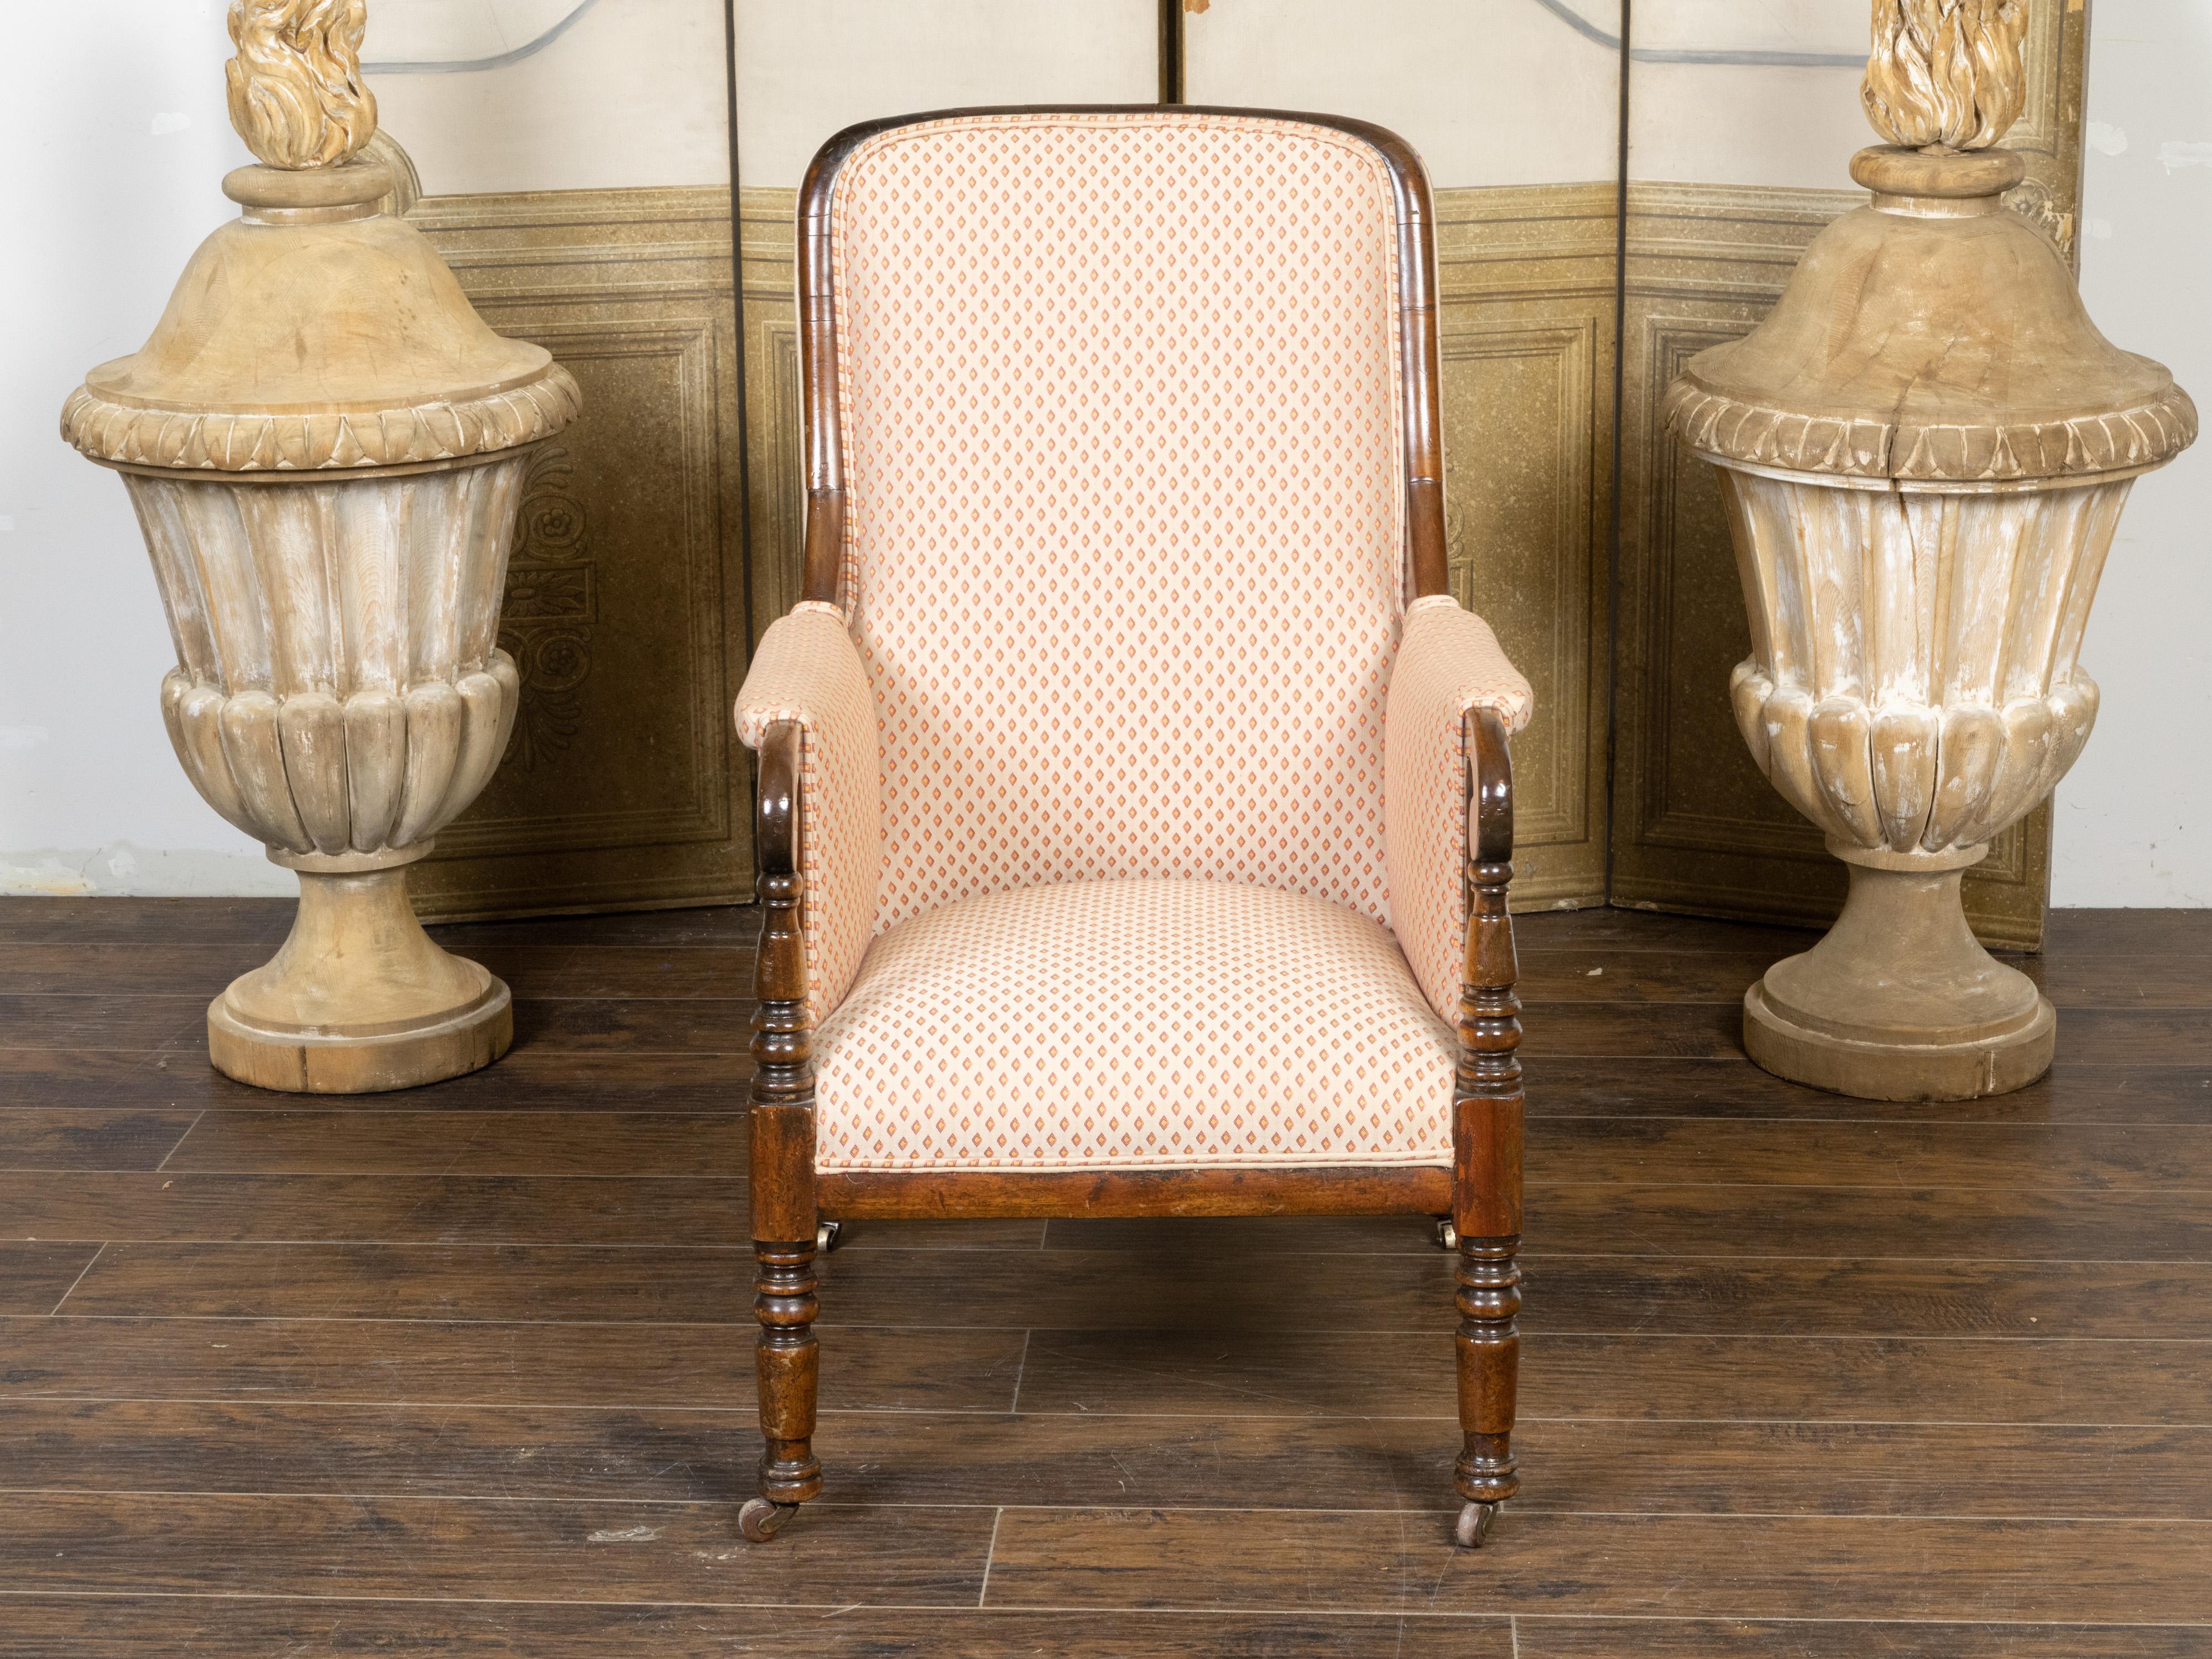 An English Regency period mahogany armchair from the early 19th century, with scrolling arms, turned legs, upholstery and petite casters. Created in England during the second quarter of the 19th century, this mahogany armchair features a straight